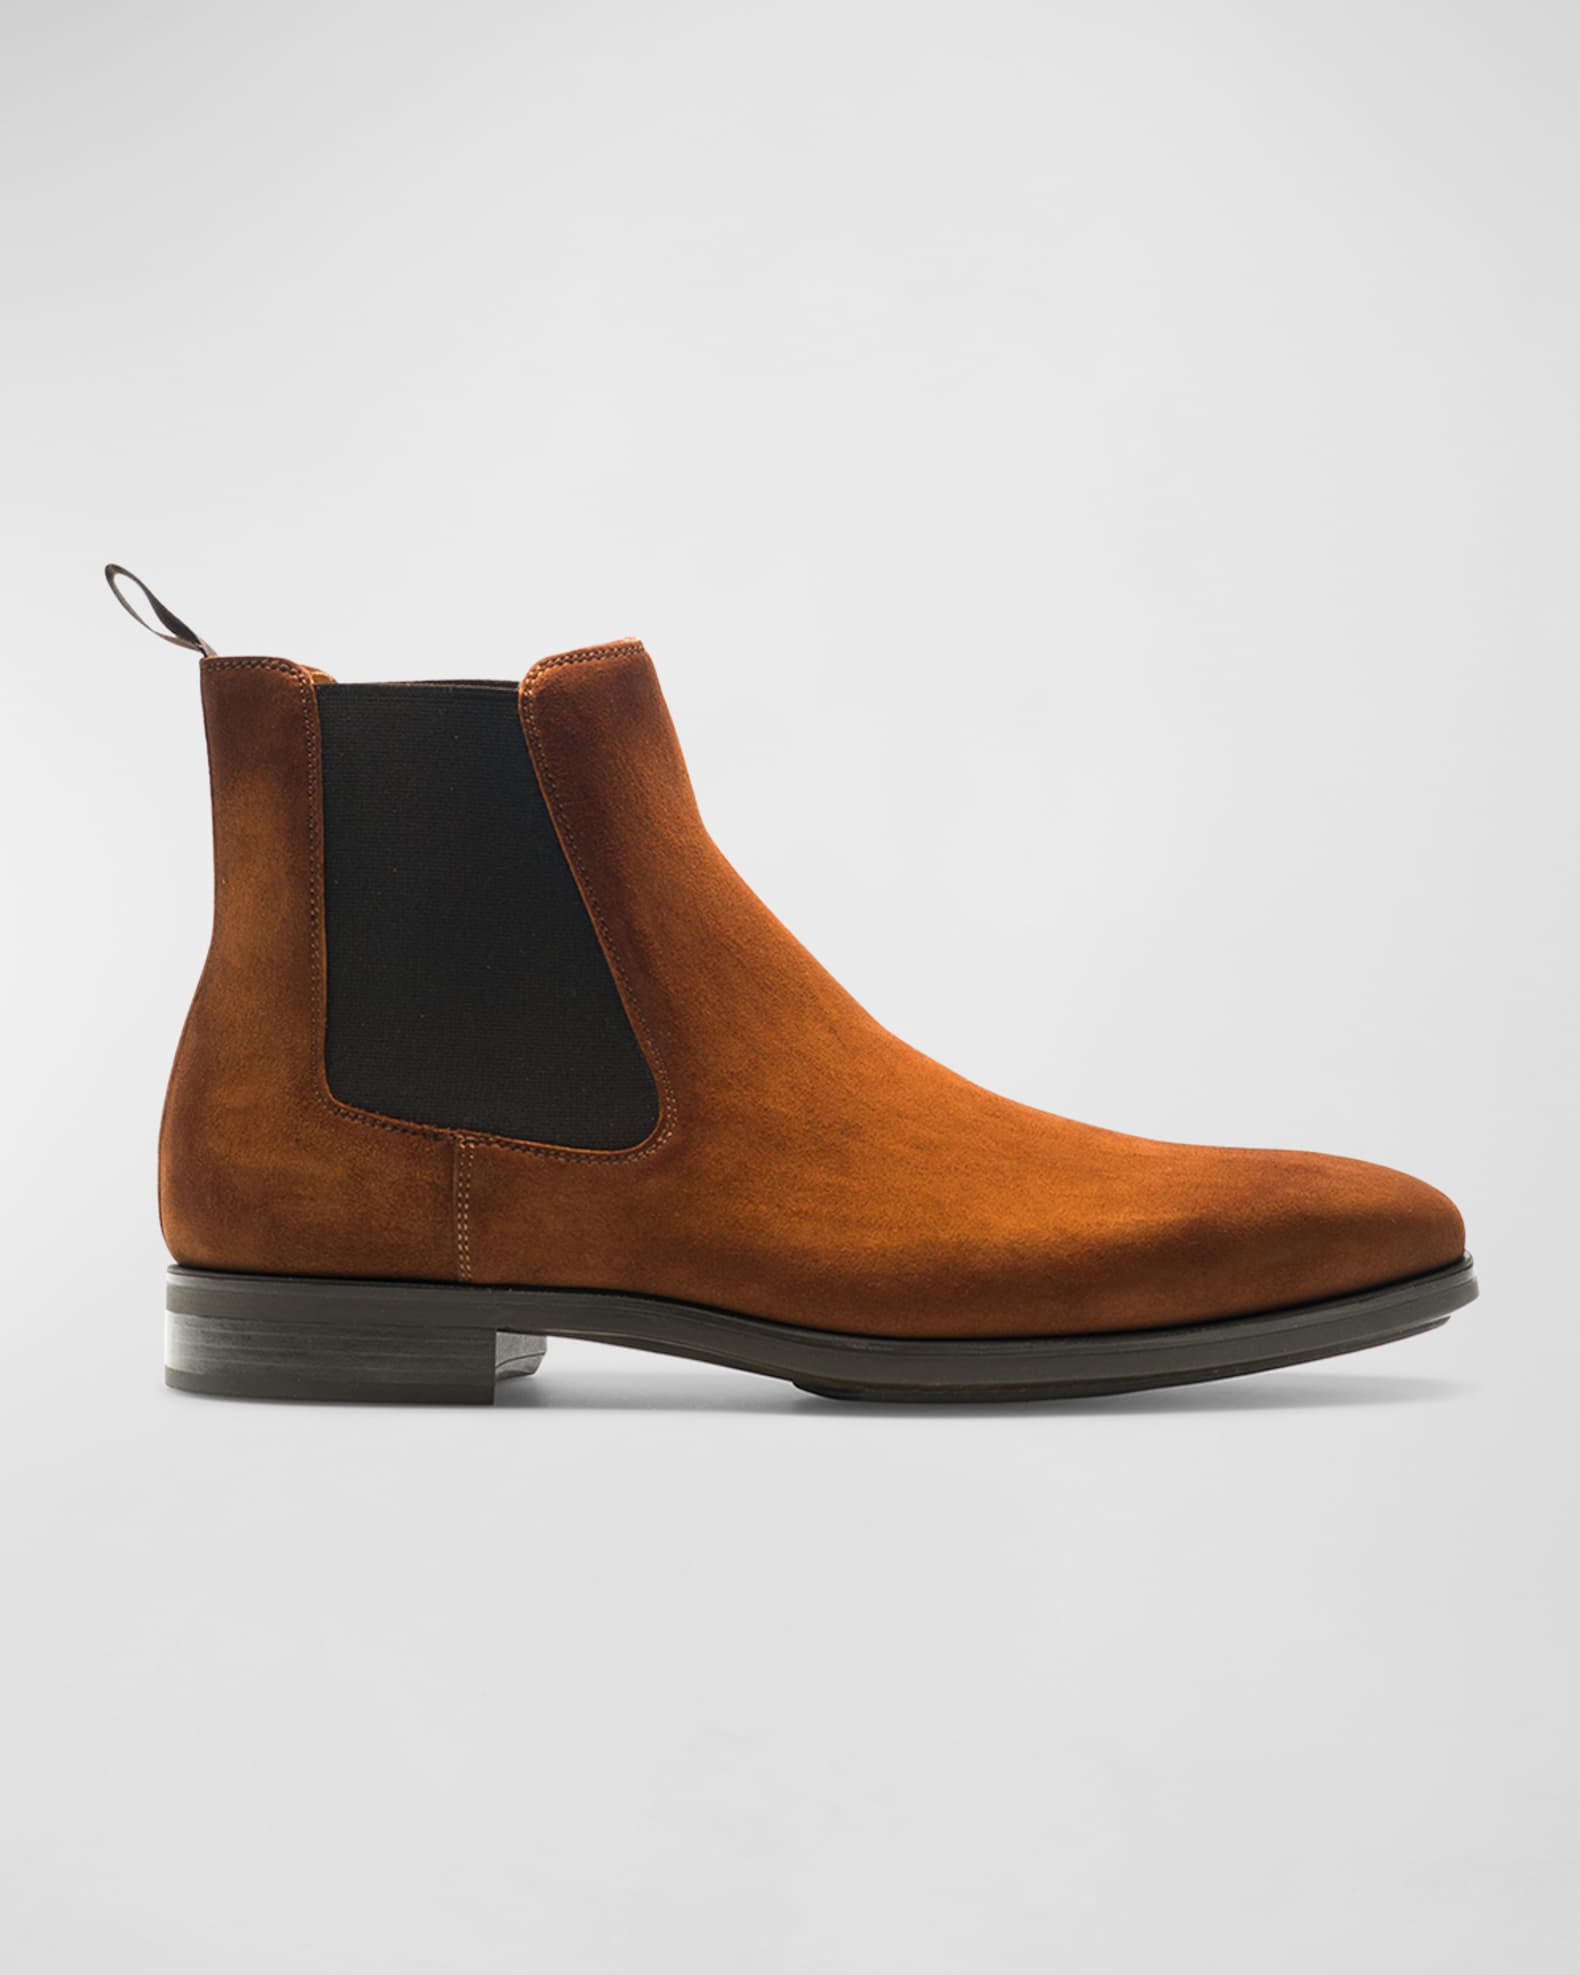 Textured Sophistication: Magnanni Chelsea Boots in Suede